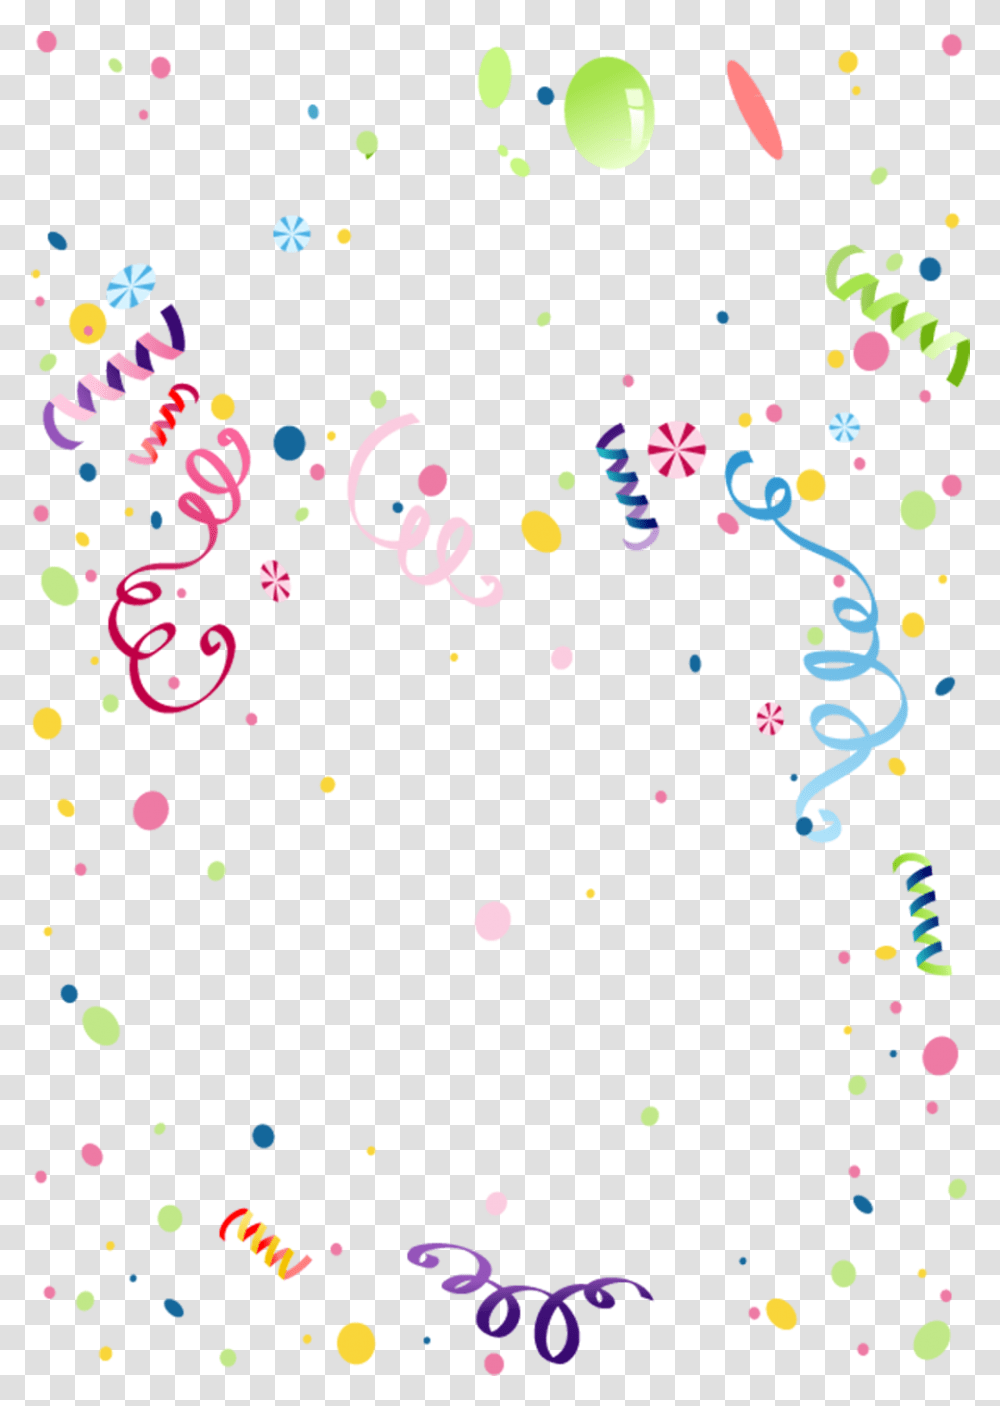 Festival Background Clipart Picture Black And White Background Hd Vector Birthday, Confetti, Paper, Christmas Tree, Ornament Transparent Png